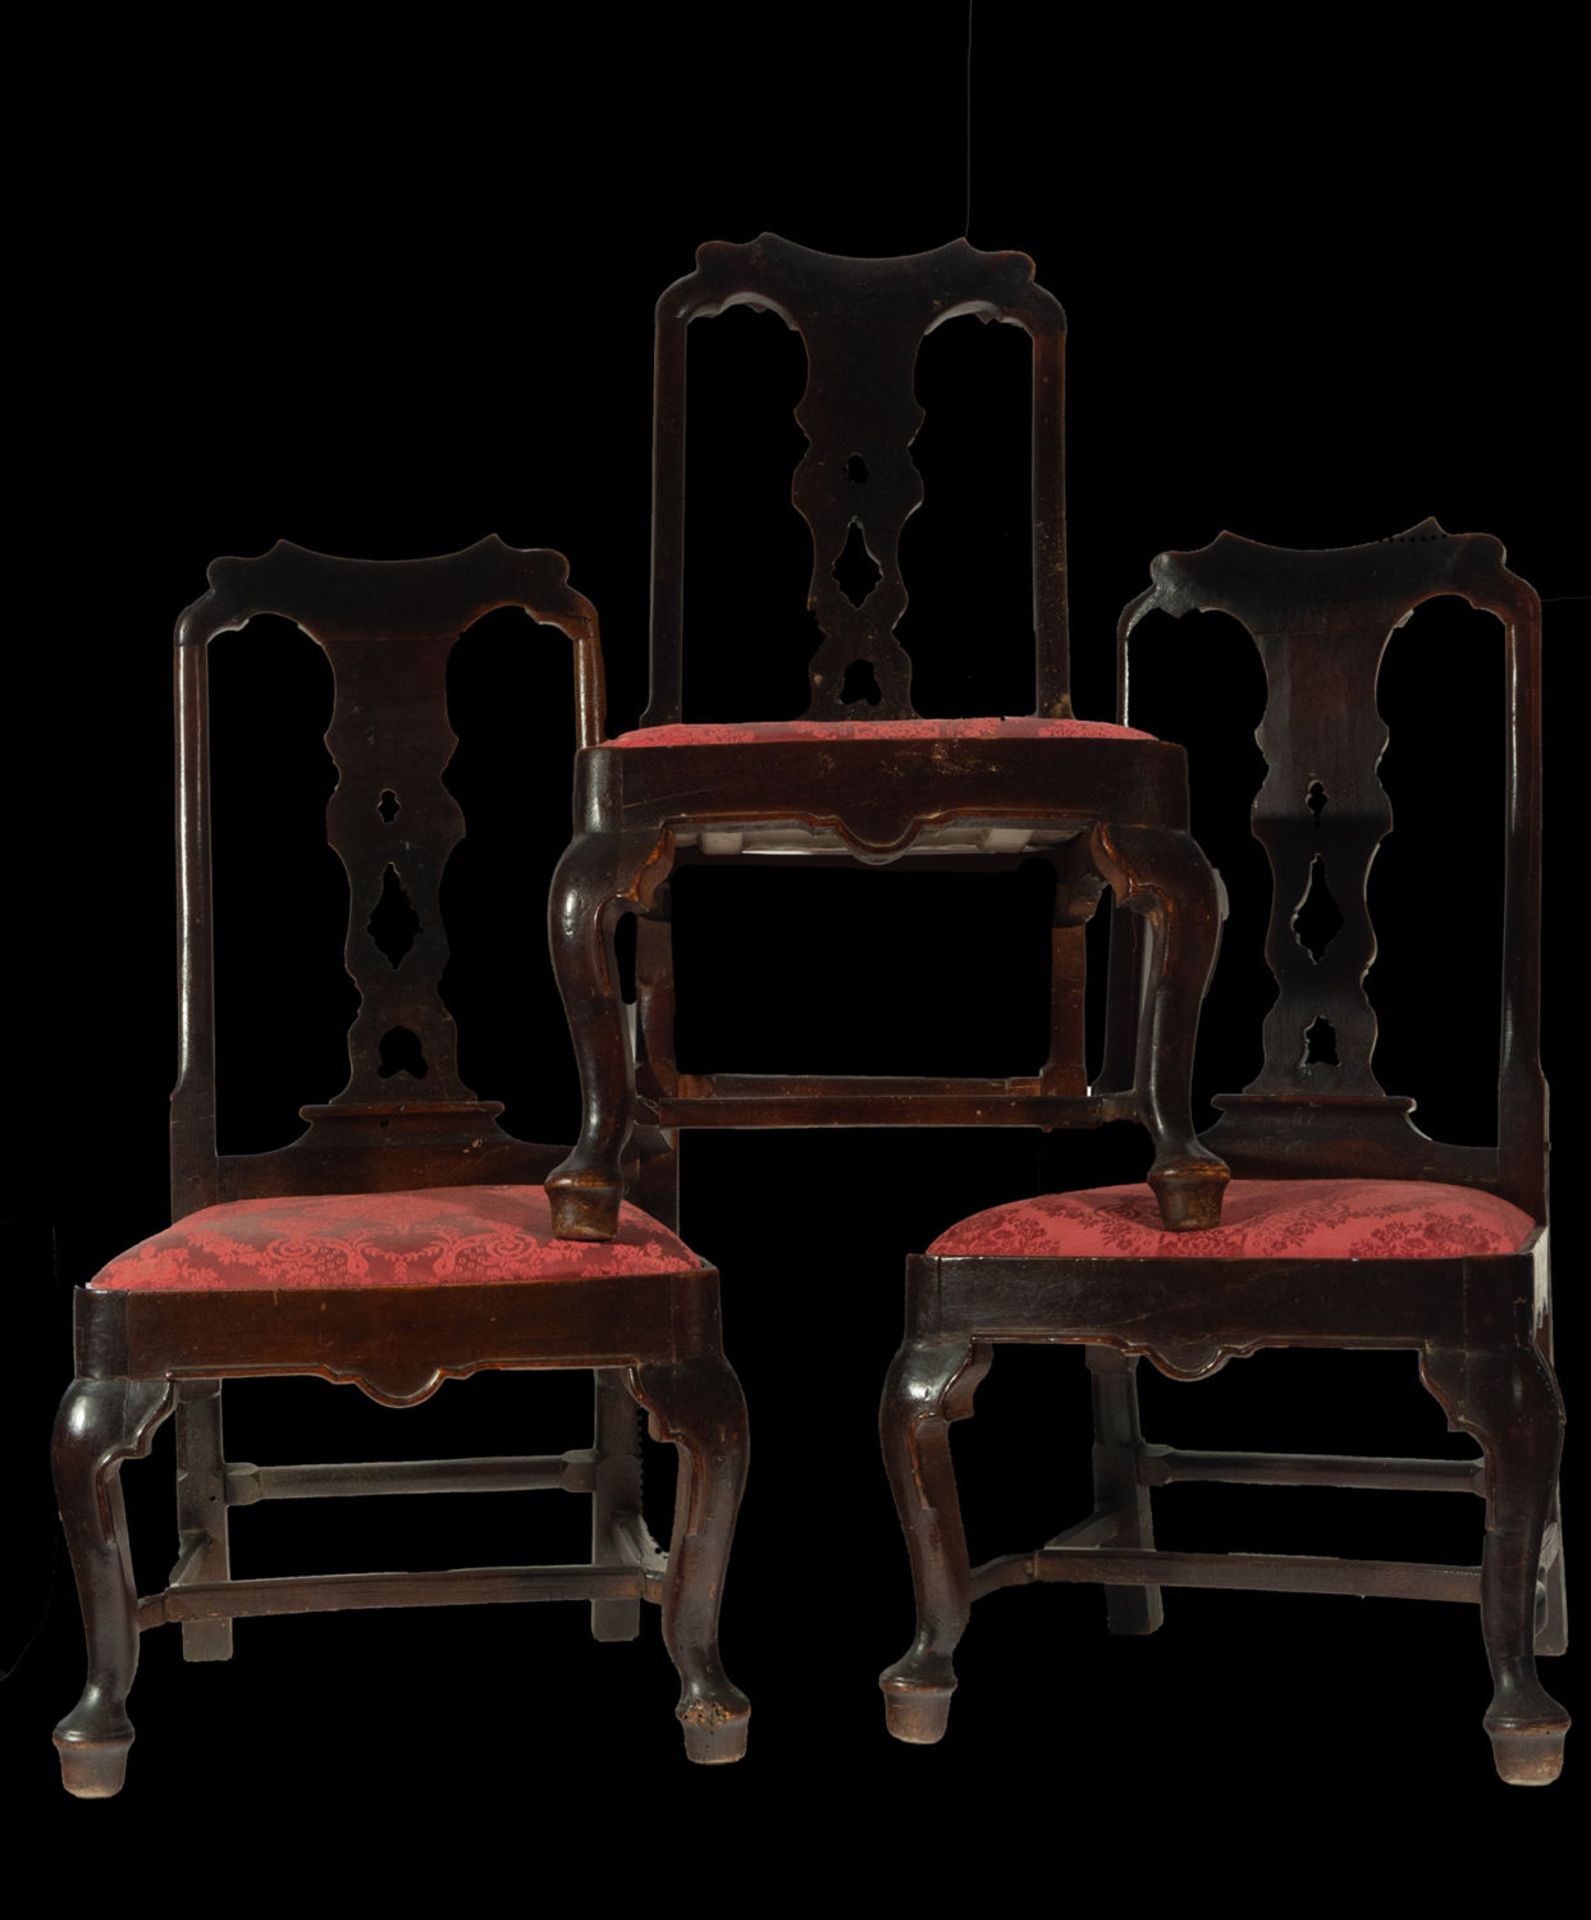 Lot of three English chairs in solid mahogany Queen Anne style, 18th century - Bild 2 aus 2